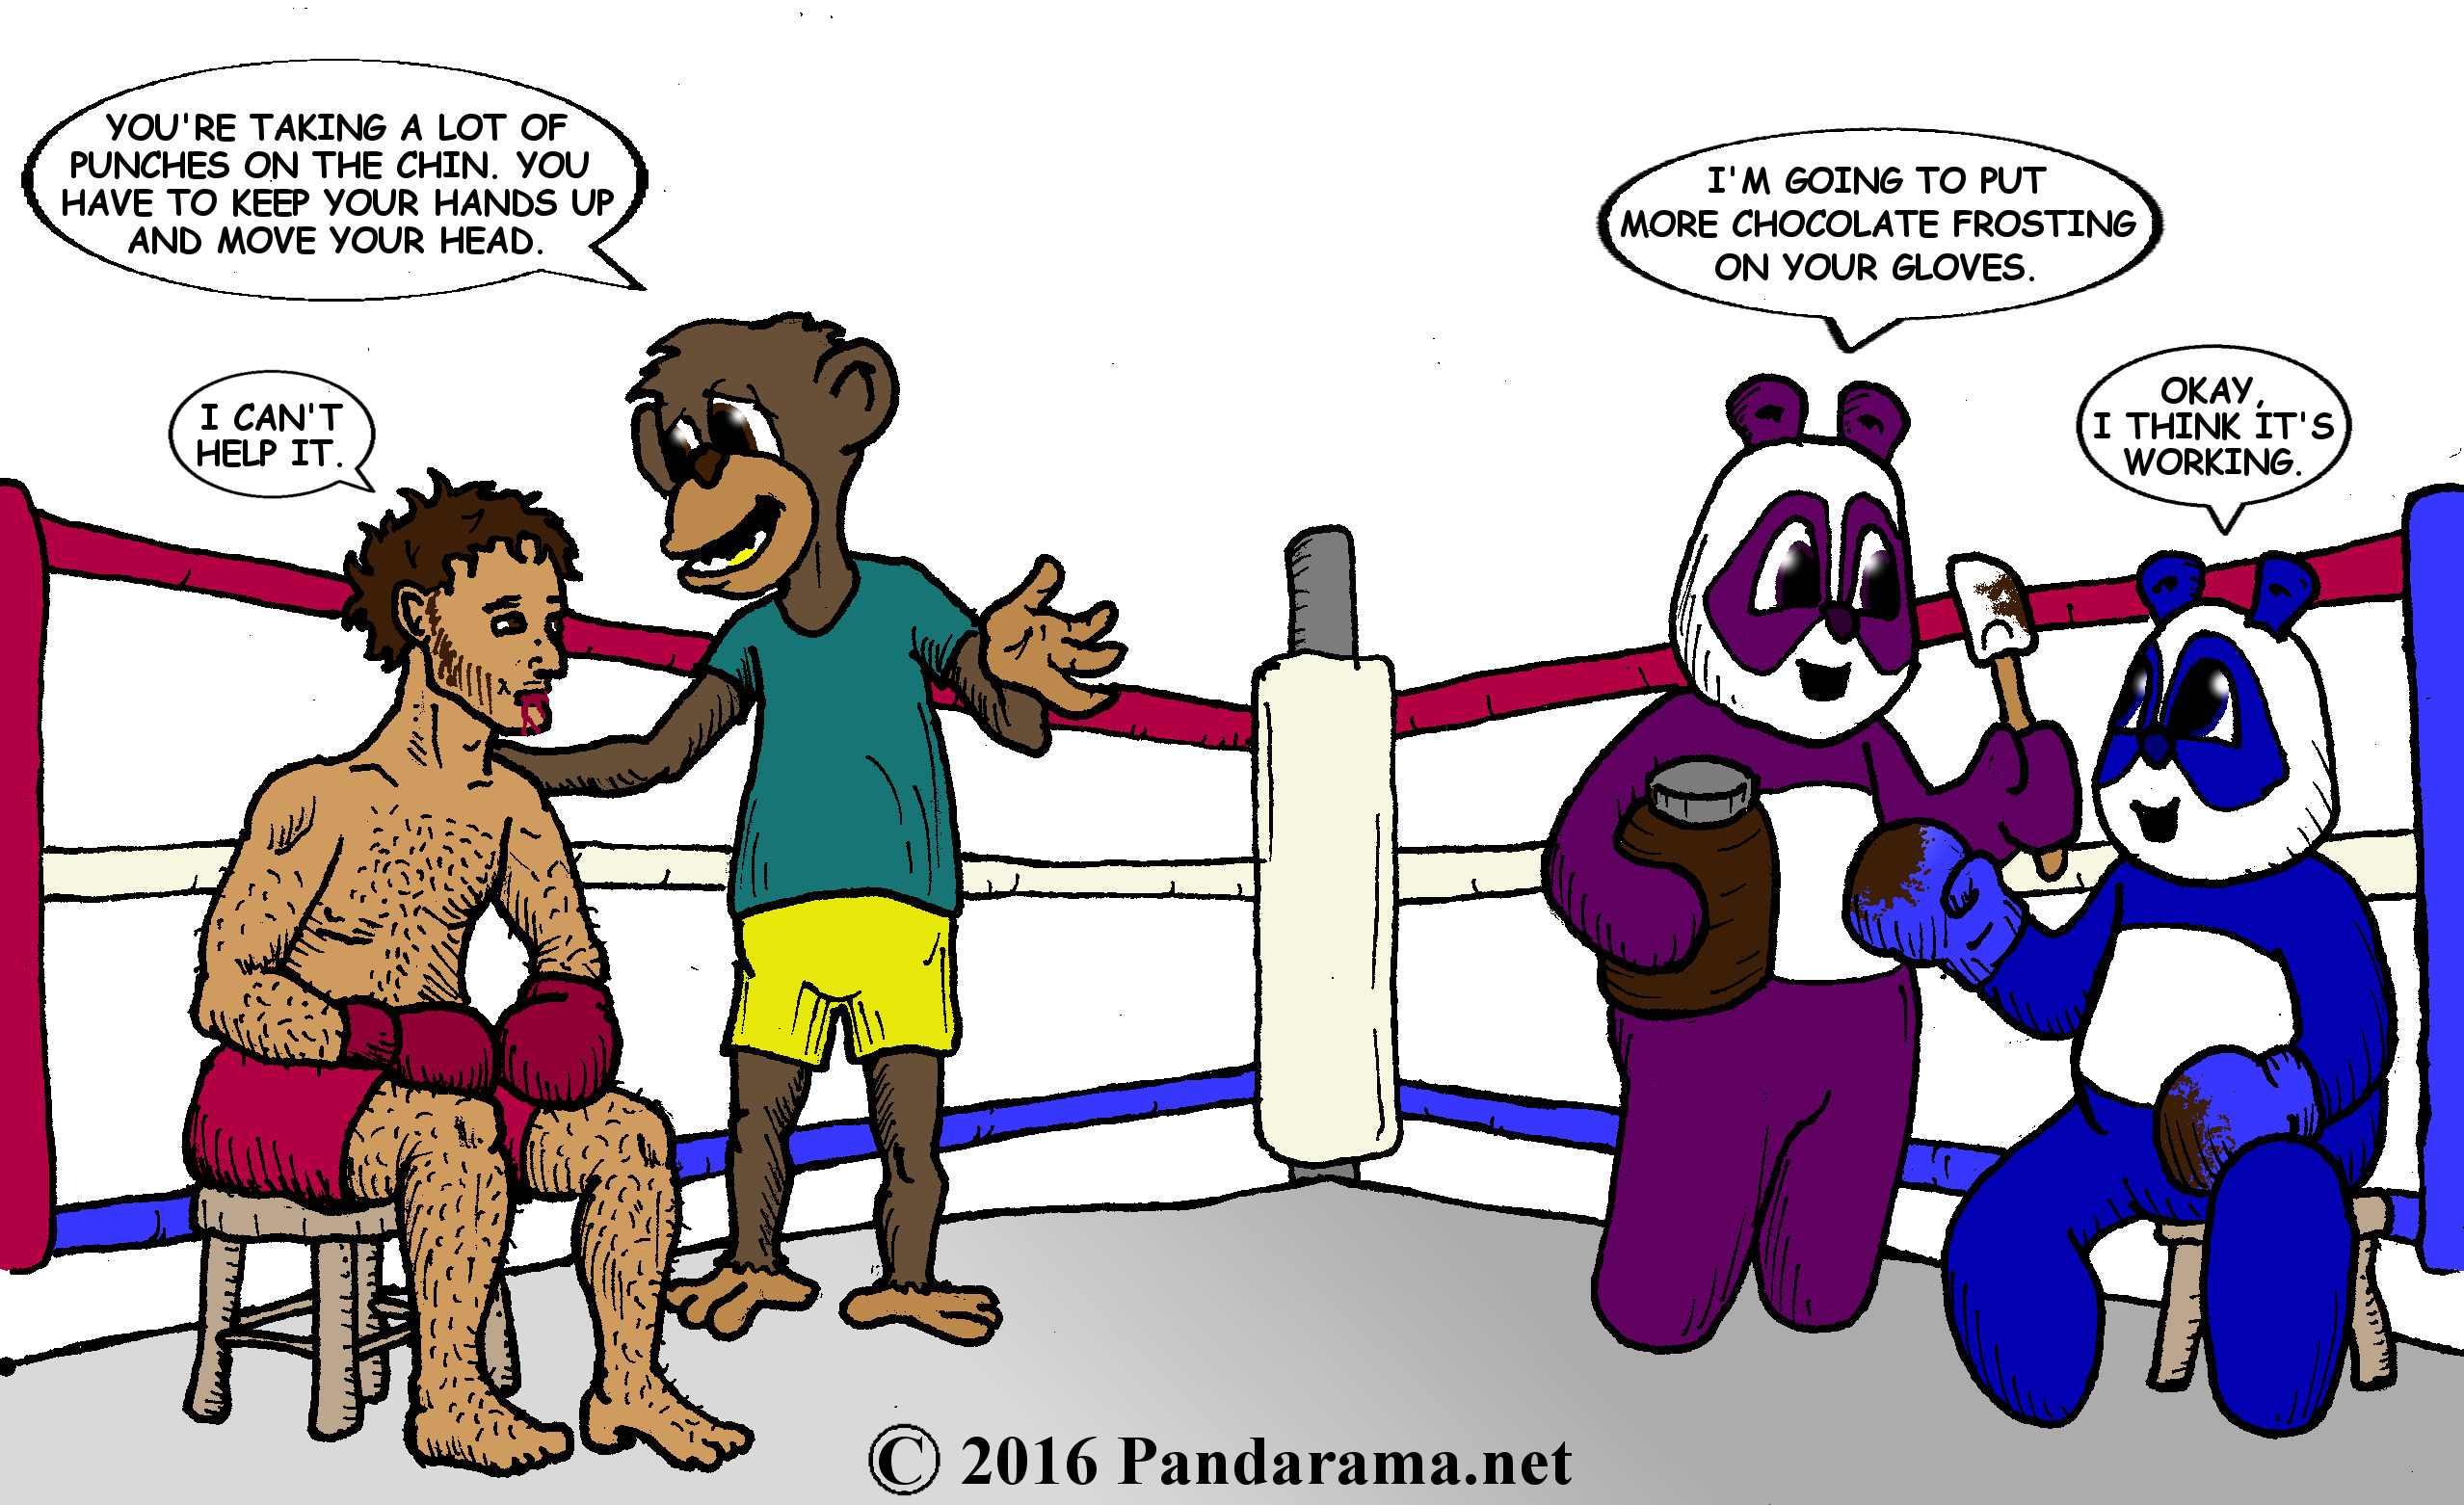 Pandarama cartoon about a boxer getting punched in the mouth because his opponent has chocolate covered gloves.